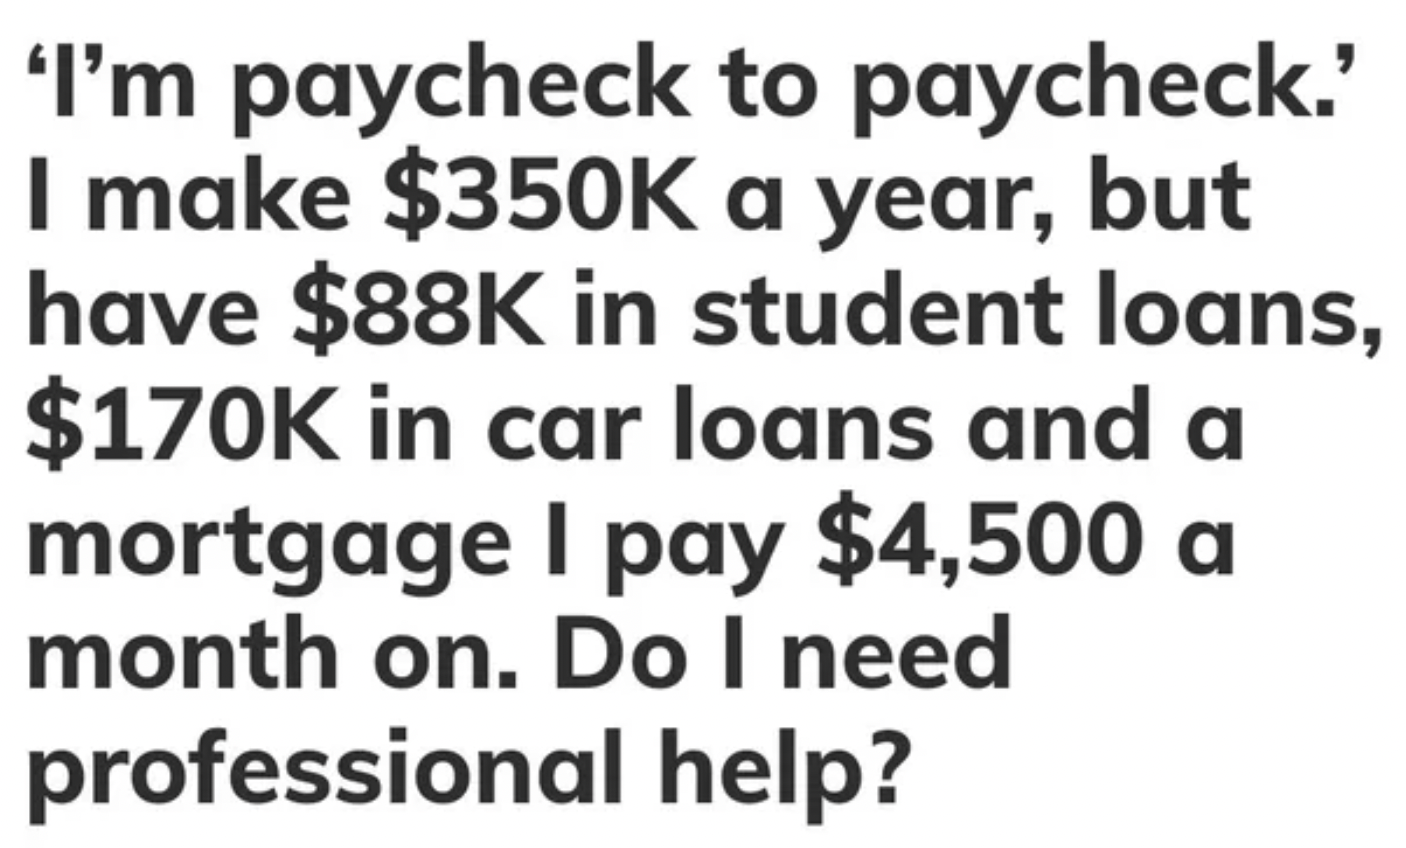 Fails and facepalms - 'I'm paycheck to paycheck.' I make $ a year, but have $88K in student loans, $ in car loans and a mortgage I pay $4,500 a month on. Do I need professional help?